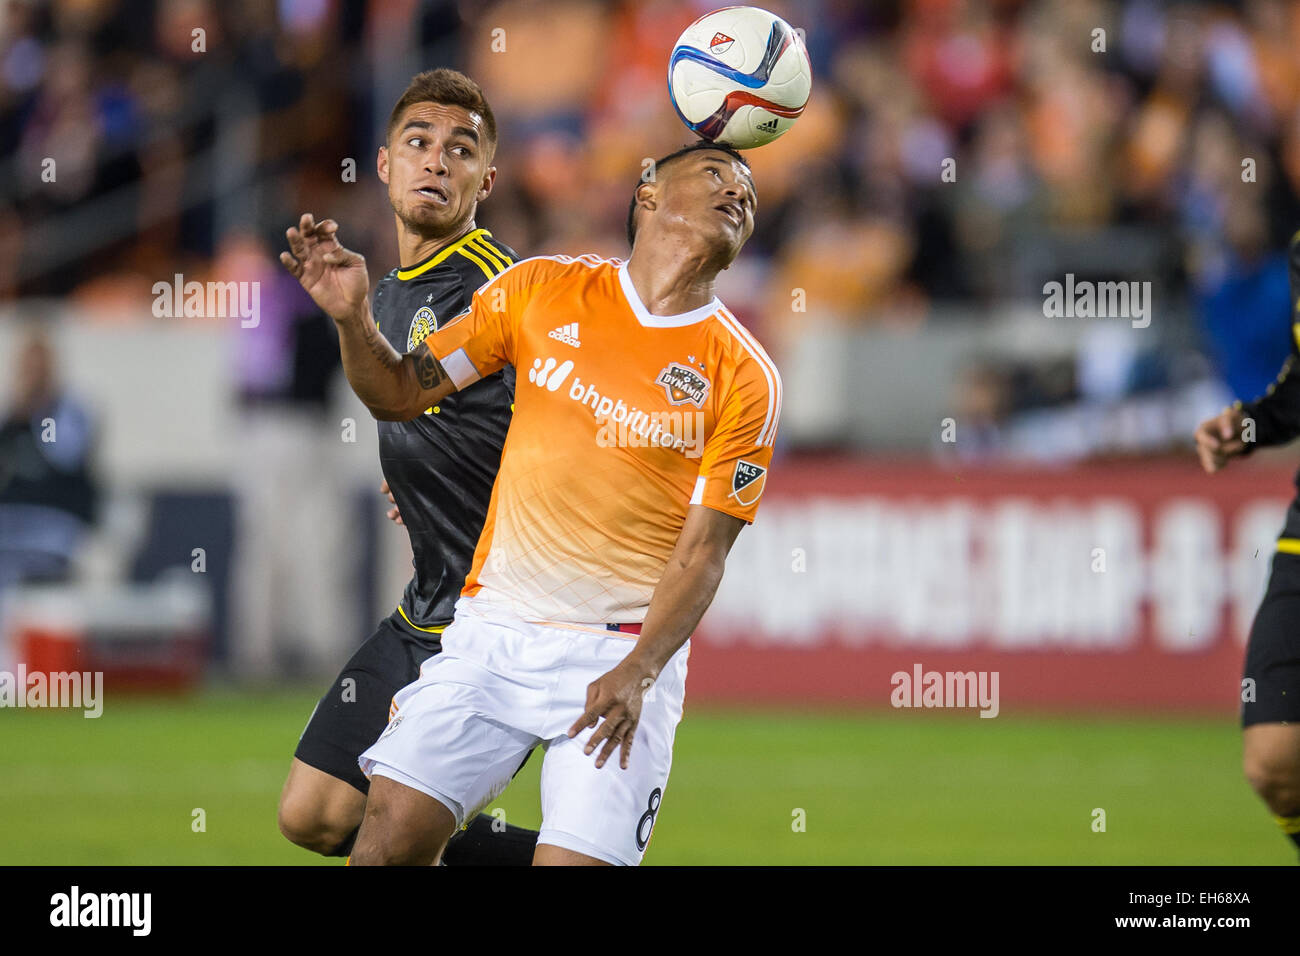 Houston, Texas, USA. 7th Mar, 2015. Houston Dynamo midfielder Luis Garrido (8) heads the ball during an MLS game between the Houston Dynamo and the Columbus Crew at BBVA Compass Stadium in Houston, TX on March 7th, 2015. The Dynamo won 1-0. © Trask Smith/ZUMA Wire/Alamy Live News Stock Photo